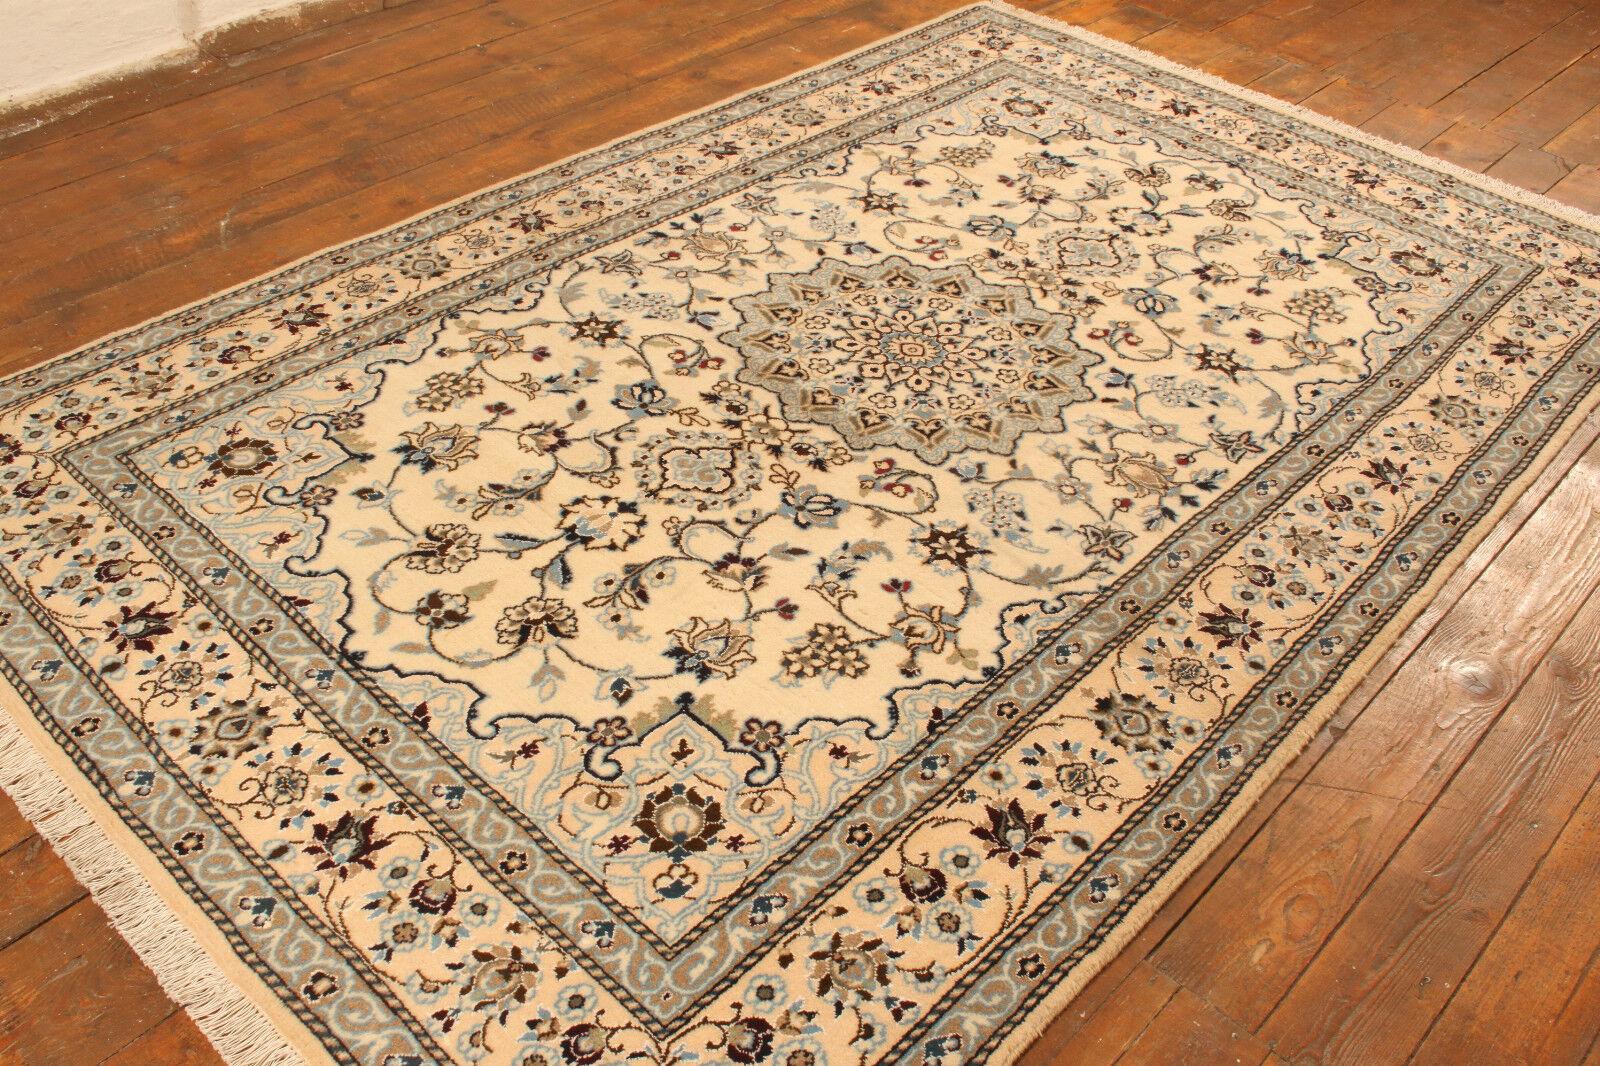 Handmade Vintage Persian Style Nain Rug With Silk (186cm x 294cm / 6.1’ x 9.6’)

Indulge in the splendor of our Handmade Vintage Persian Style Nain Rug With Silk, a masterpiece from the 1970s. This high-quality rug, with dimensions of 186cm x 294cm